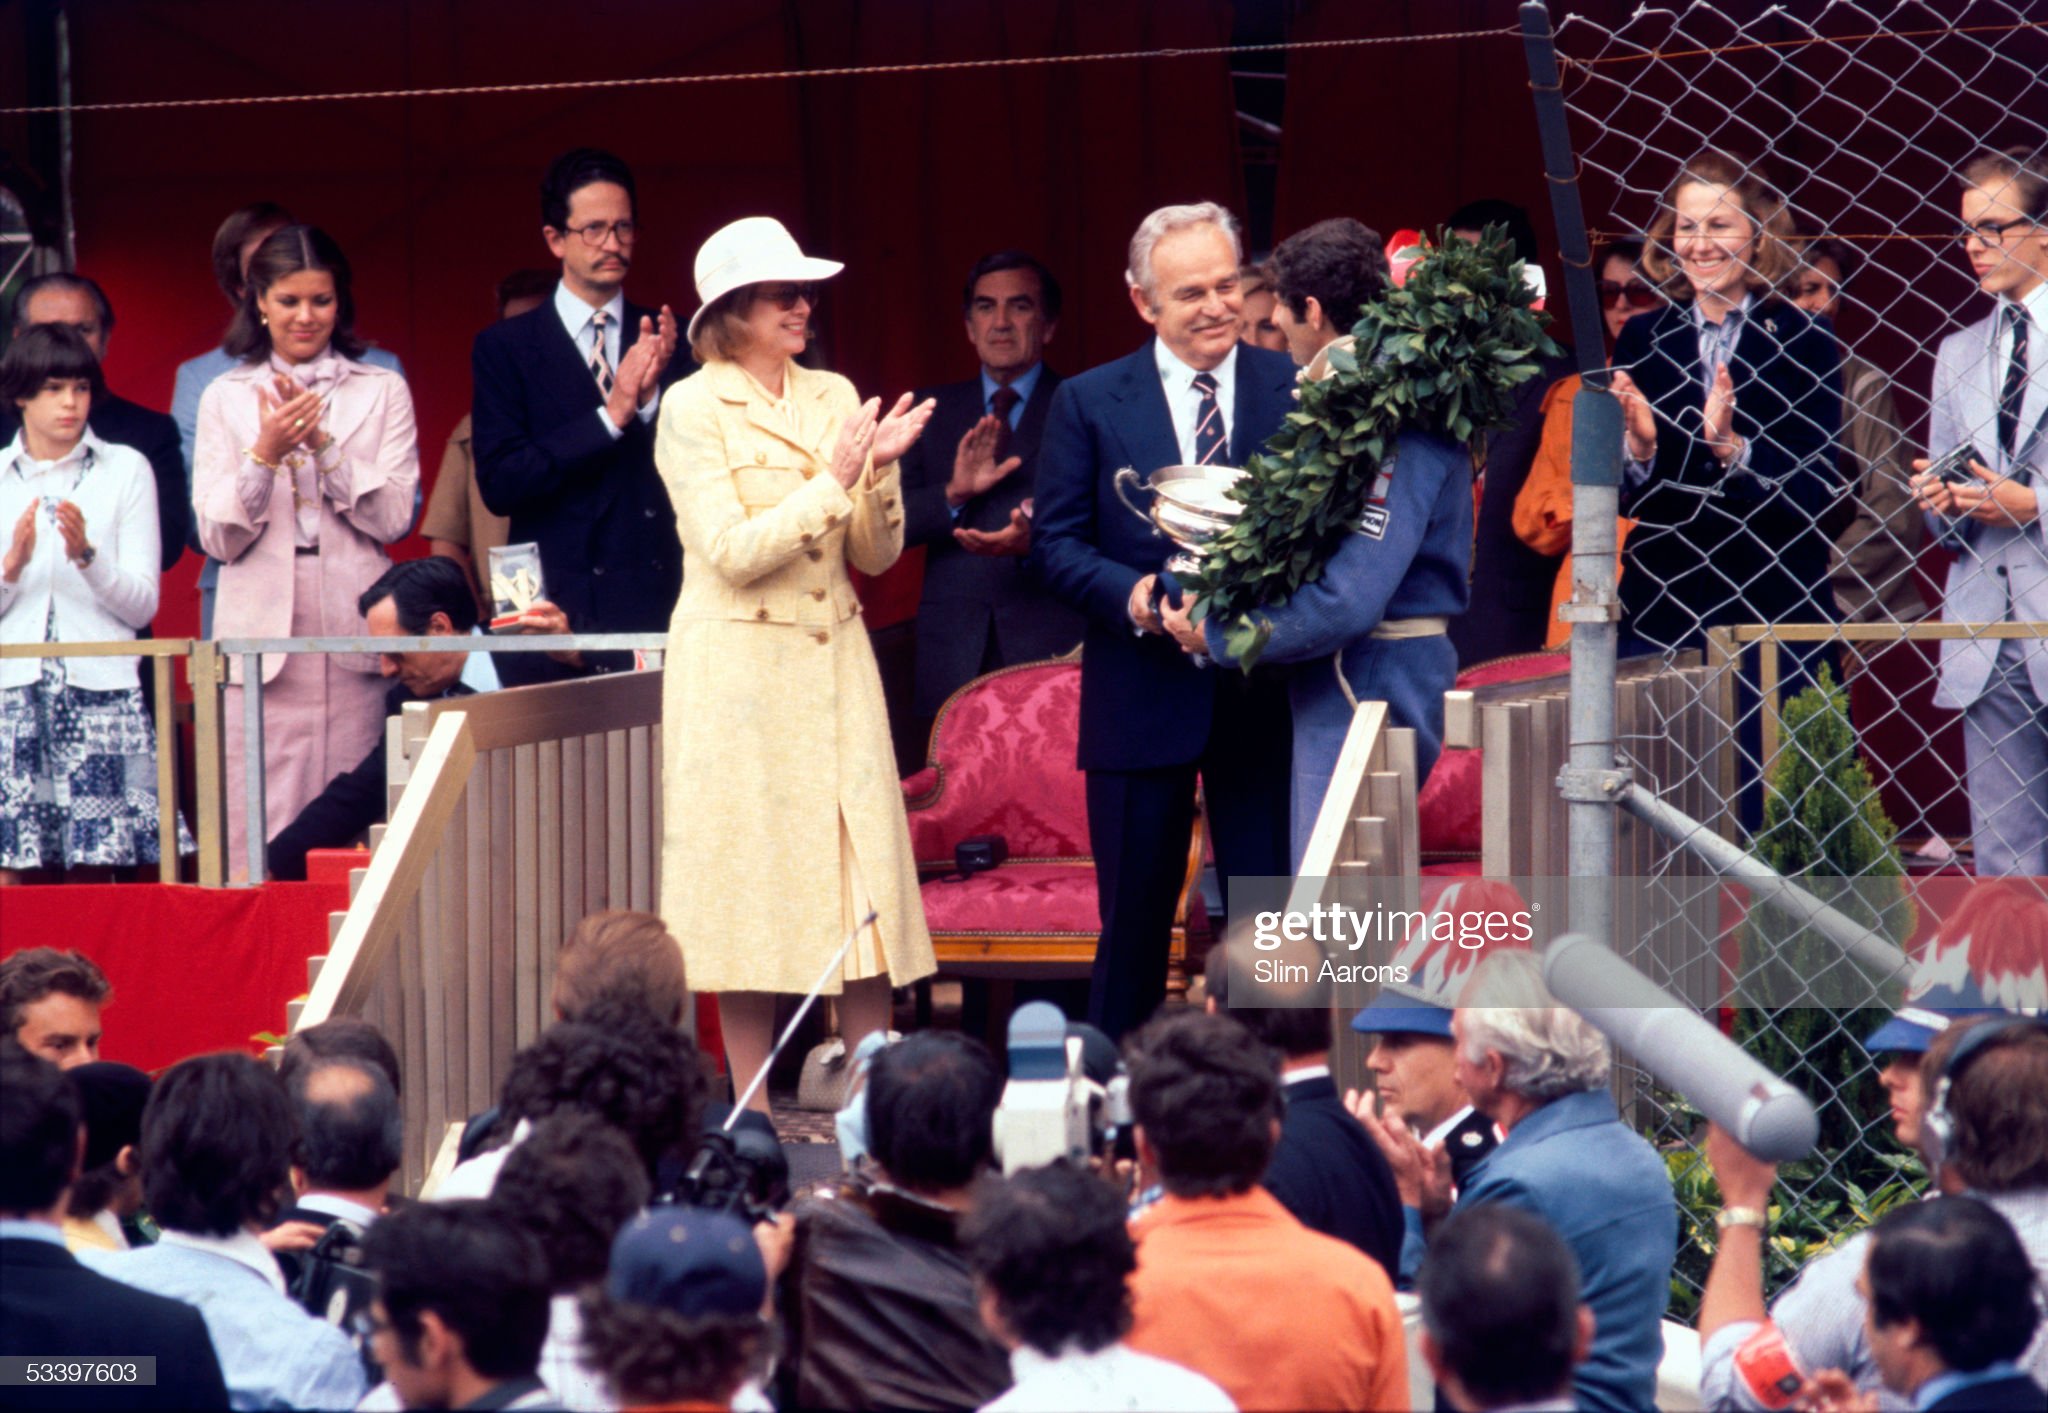 Princesses Stephanie, Caroline and Grace of Monaco applaud as Prince Rainier III gives the trophy to Jody Scheckter after his victory in the Monaco Grand Prix on 22nd May 1977.